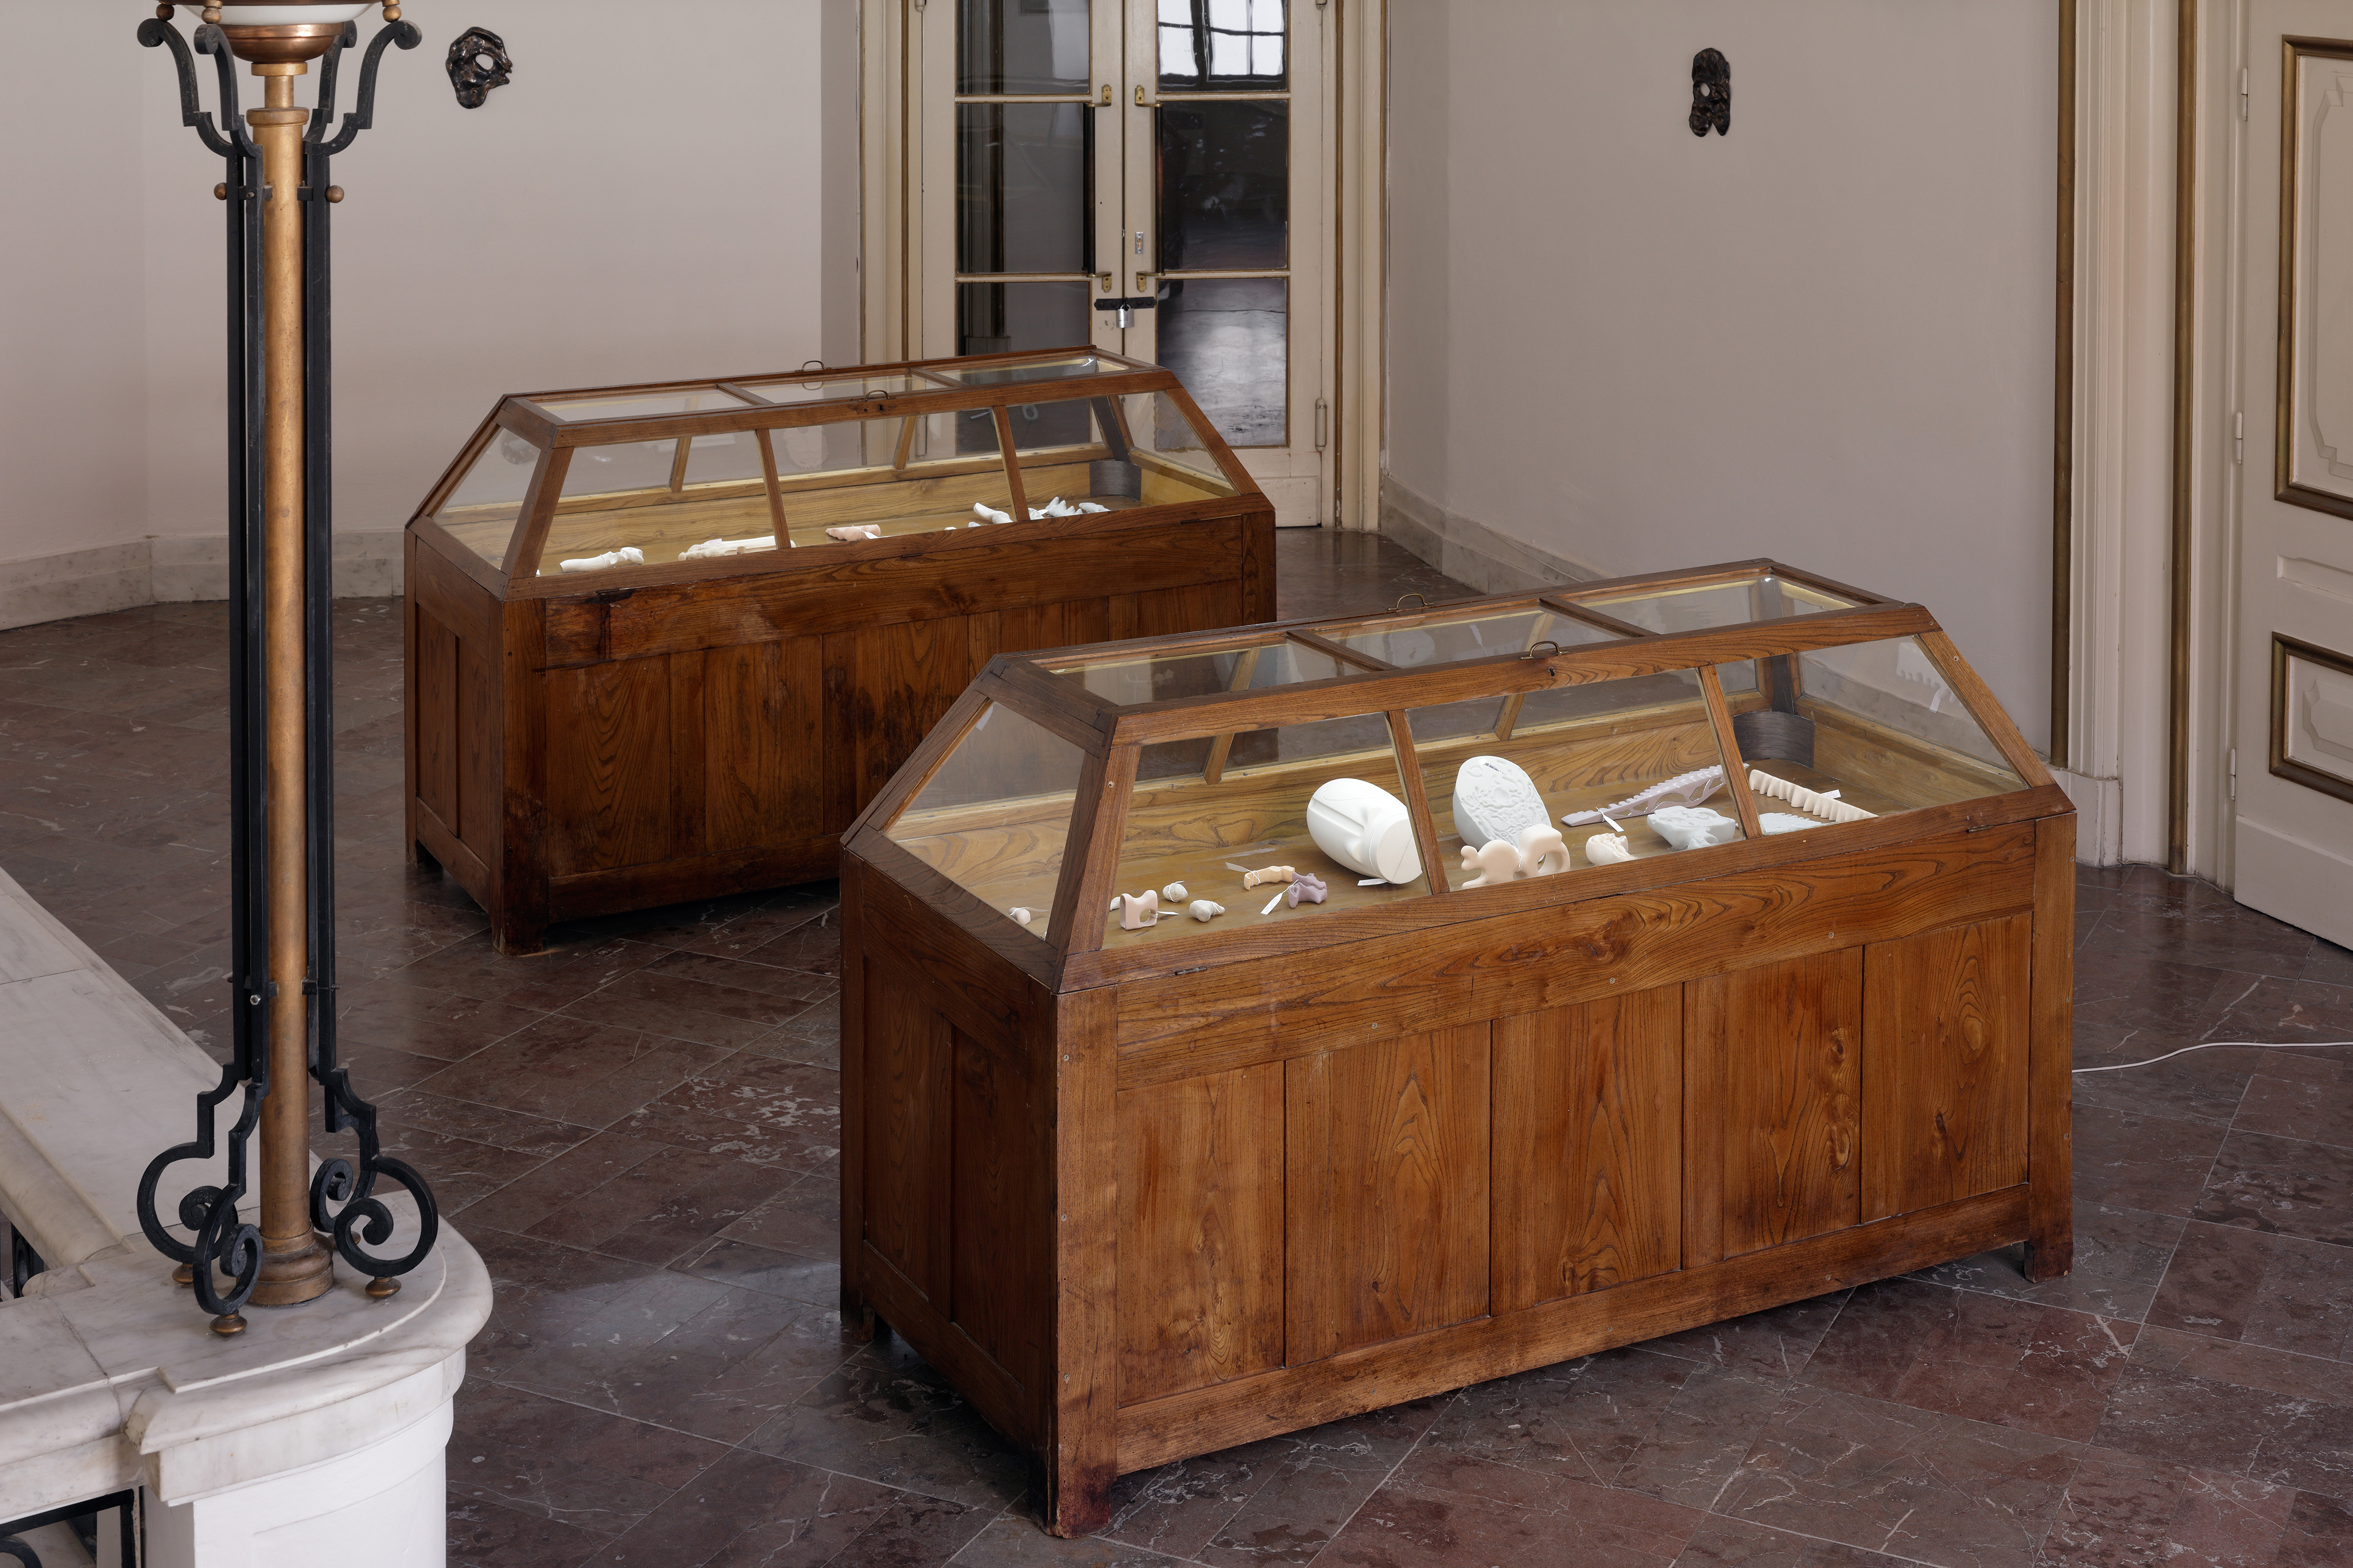 Photo of an art installation called Hands (and Other Products of Labor) 2.0 by Klára Čermáková (Mikulov Art Symposium, Mikulov, Czechia, 2021) [Front view]. There are several smaller art objects in two pieces of old museum furniture (called “coffins” for their unique shape).